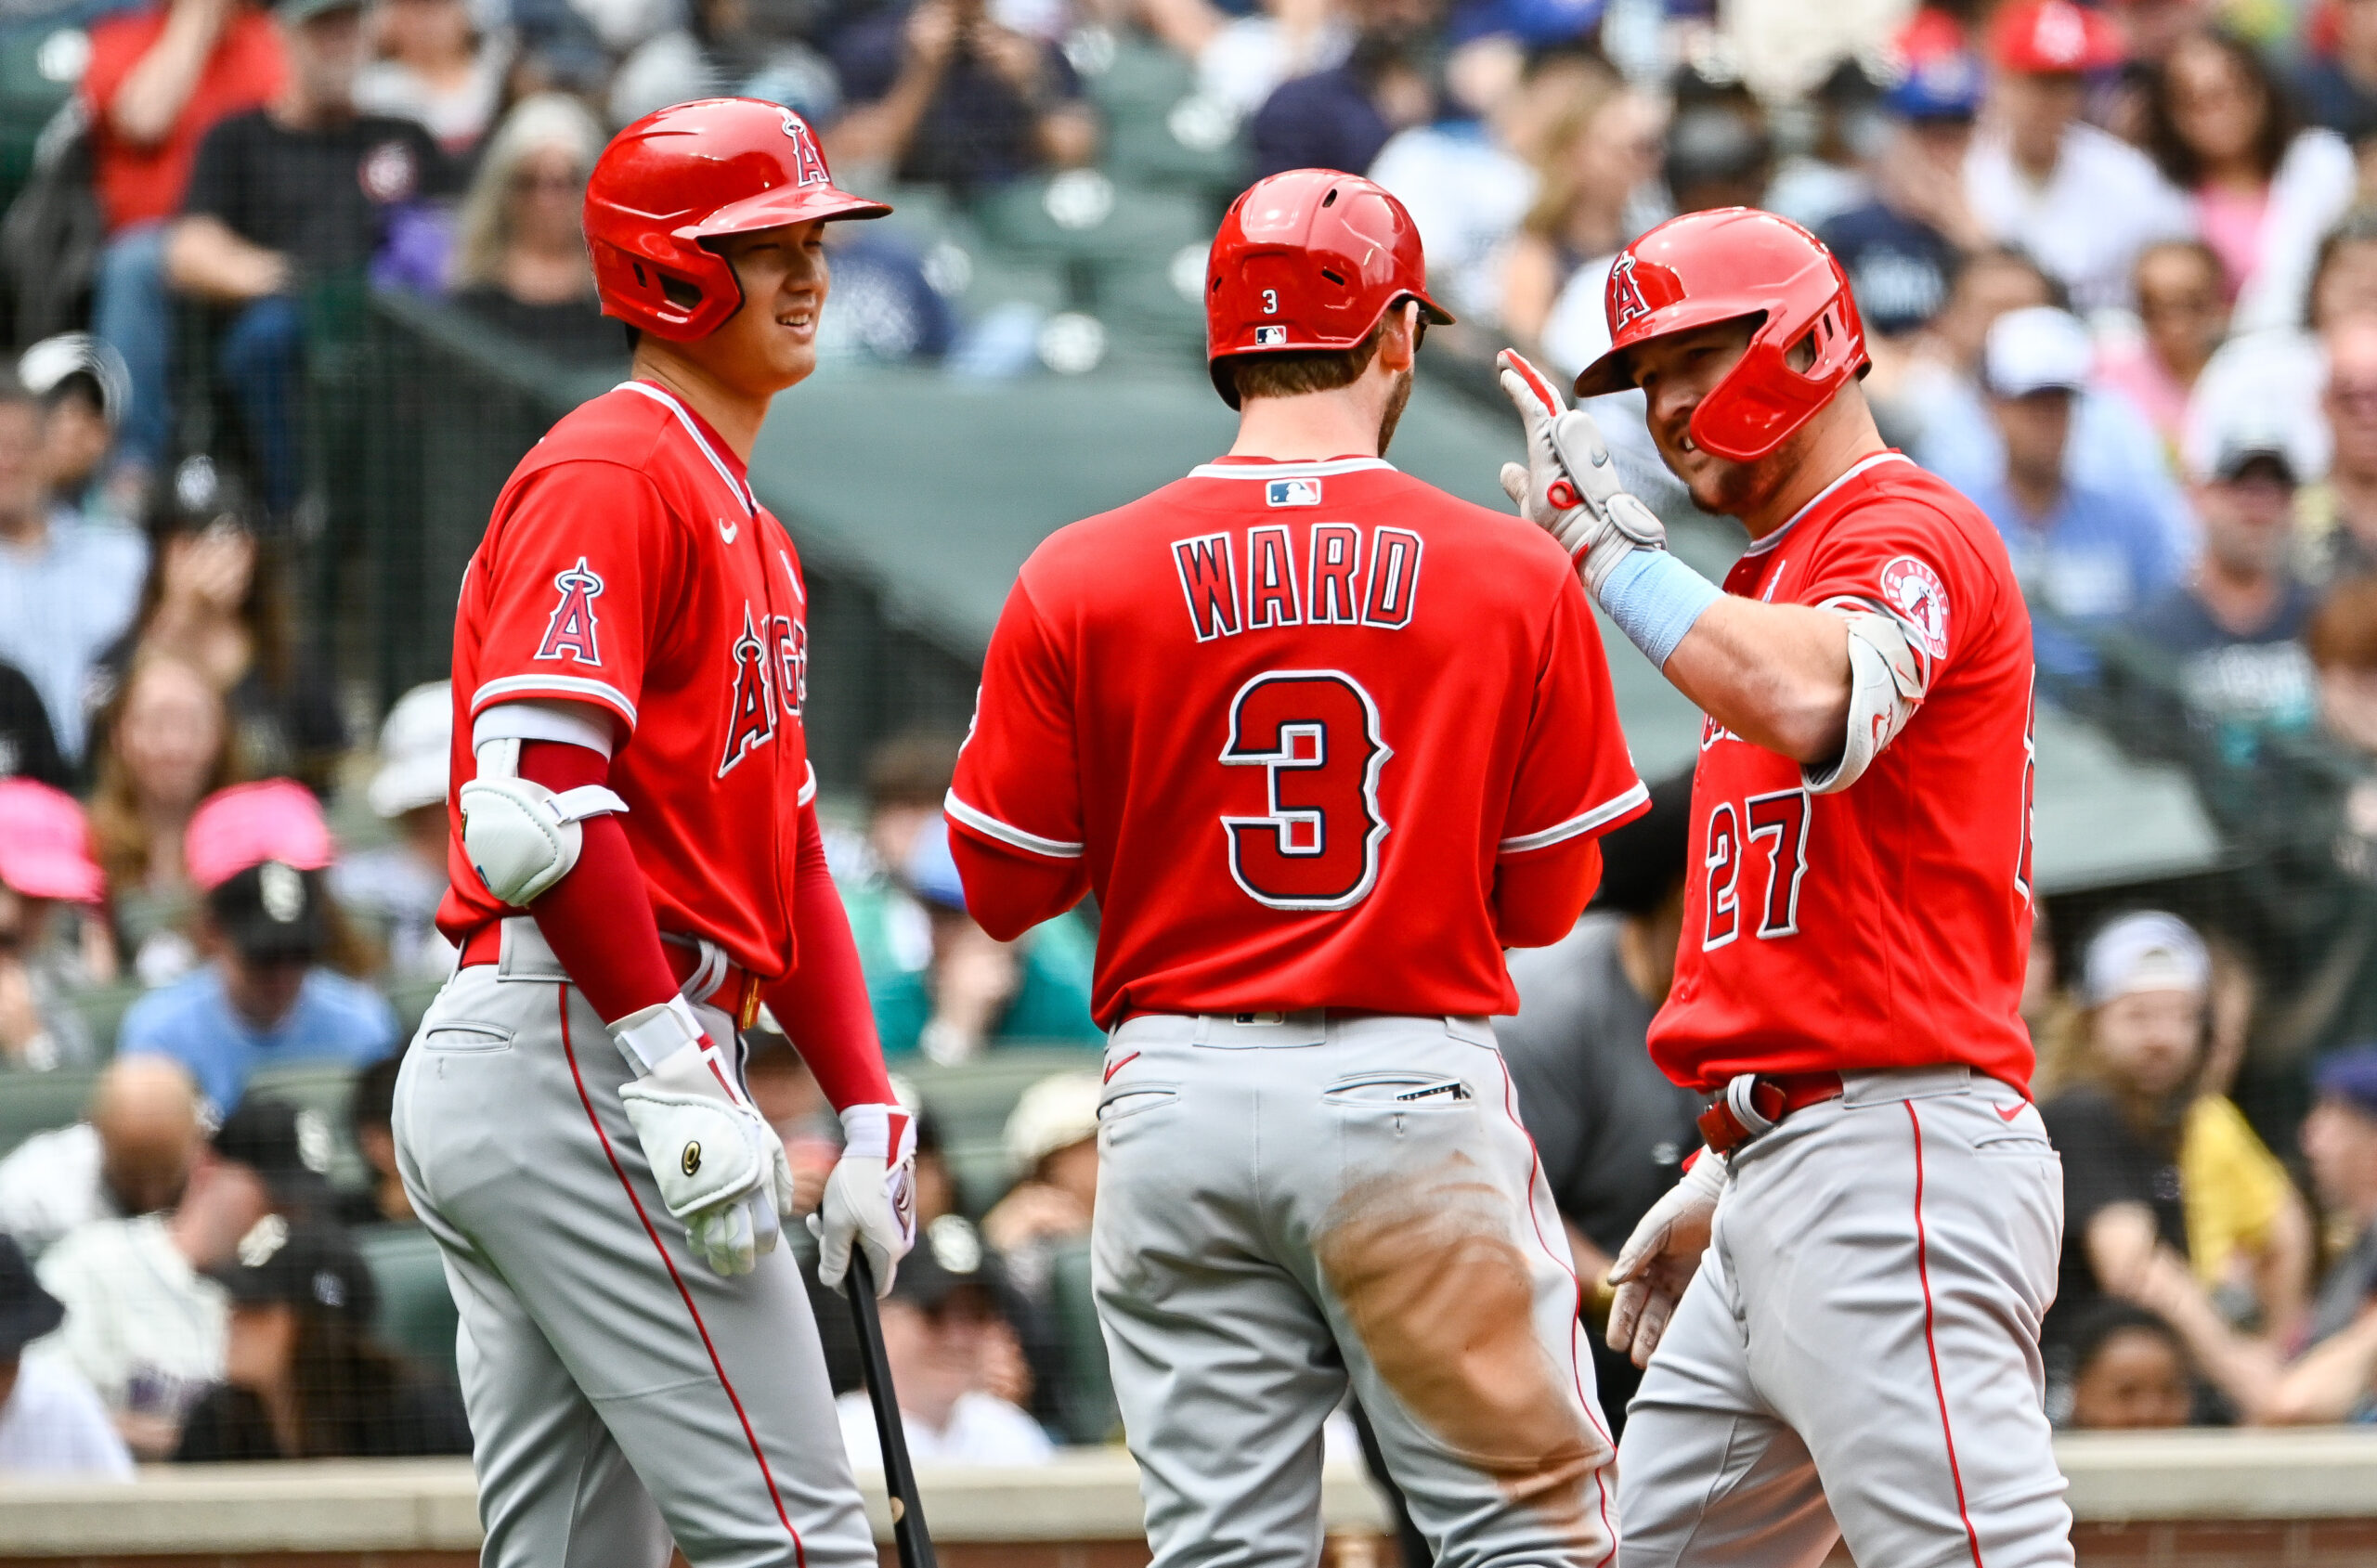 If Angels are going nowhere, then should Shohei Ohtani and Mike